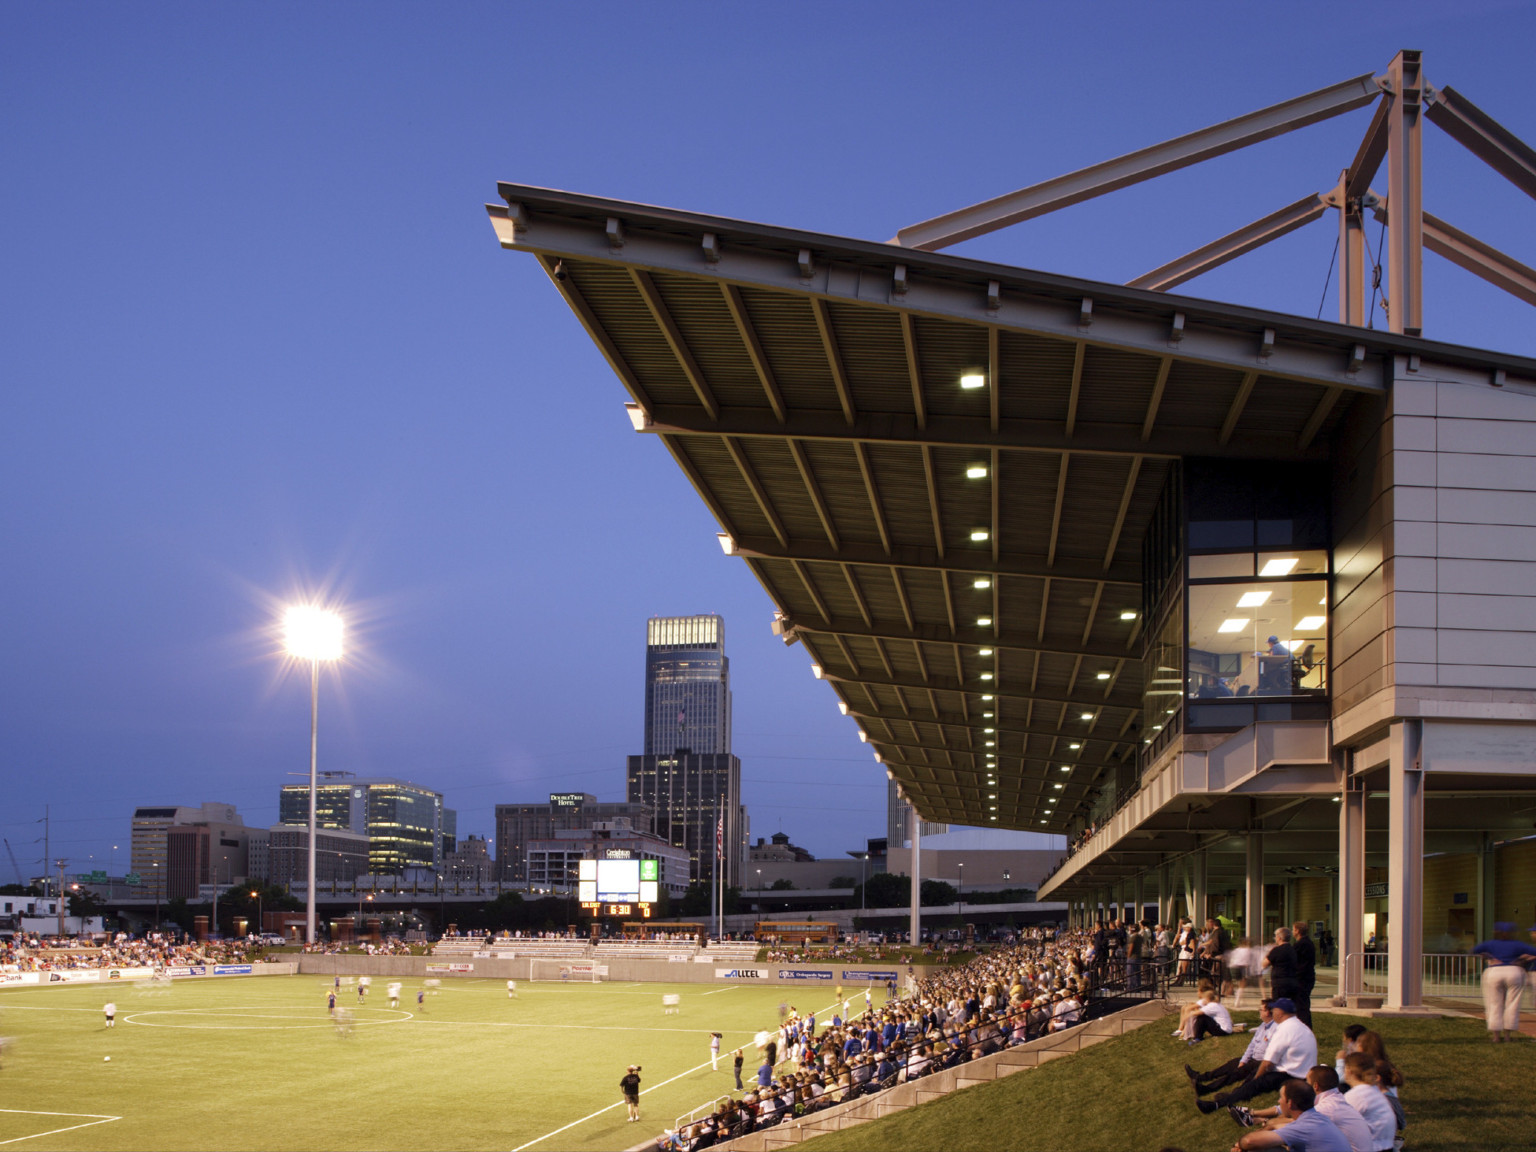 Side view of bleachers with lights in canopy and elevated box seat illuminated from within. Soccer field to left during game